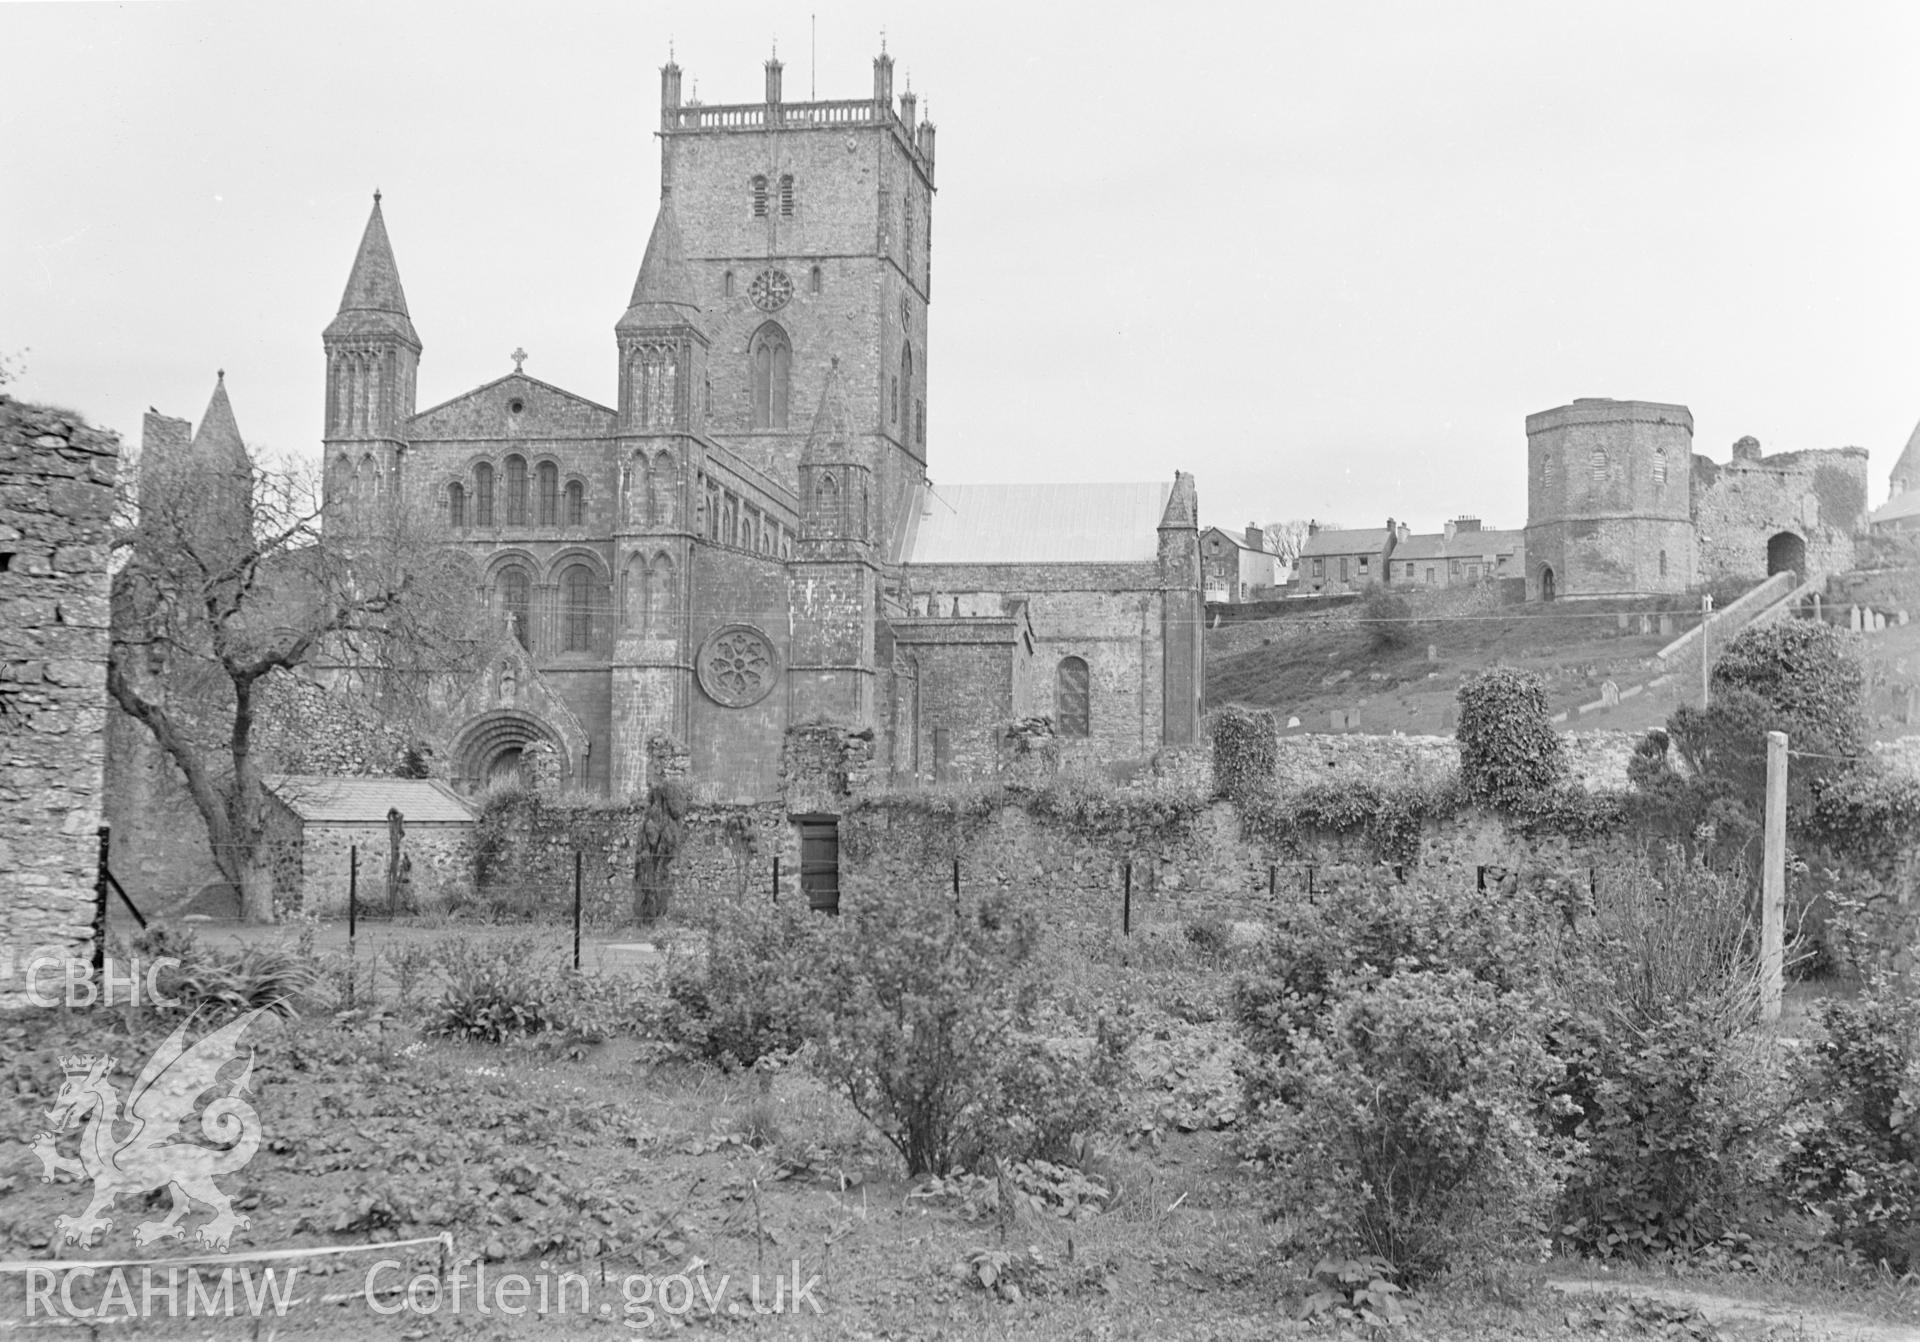 Black and white nitrate negative showing exterior view of St David's Cathedral.